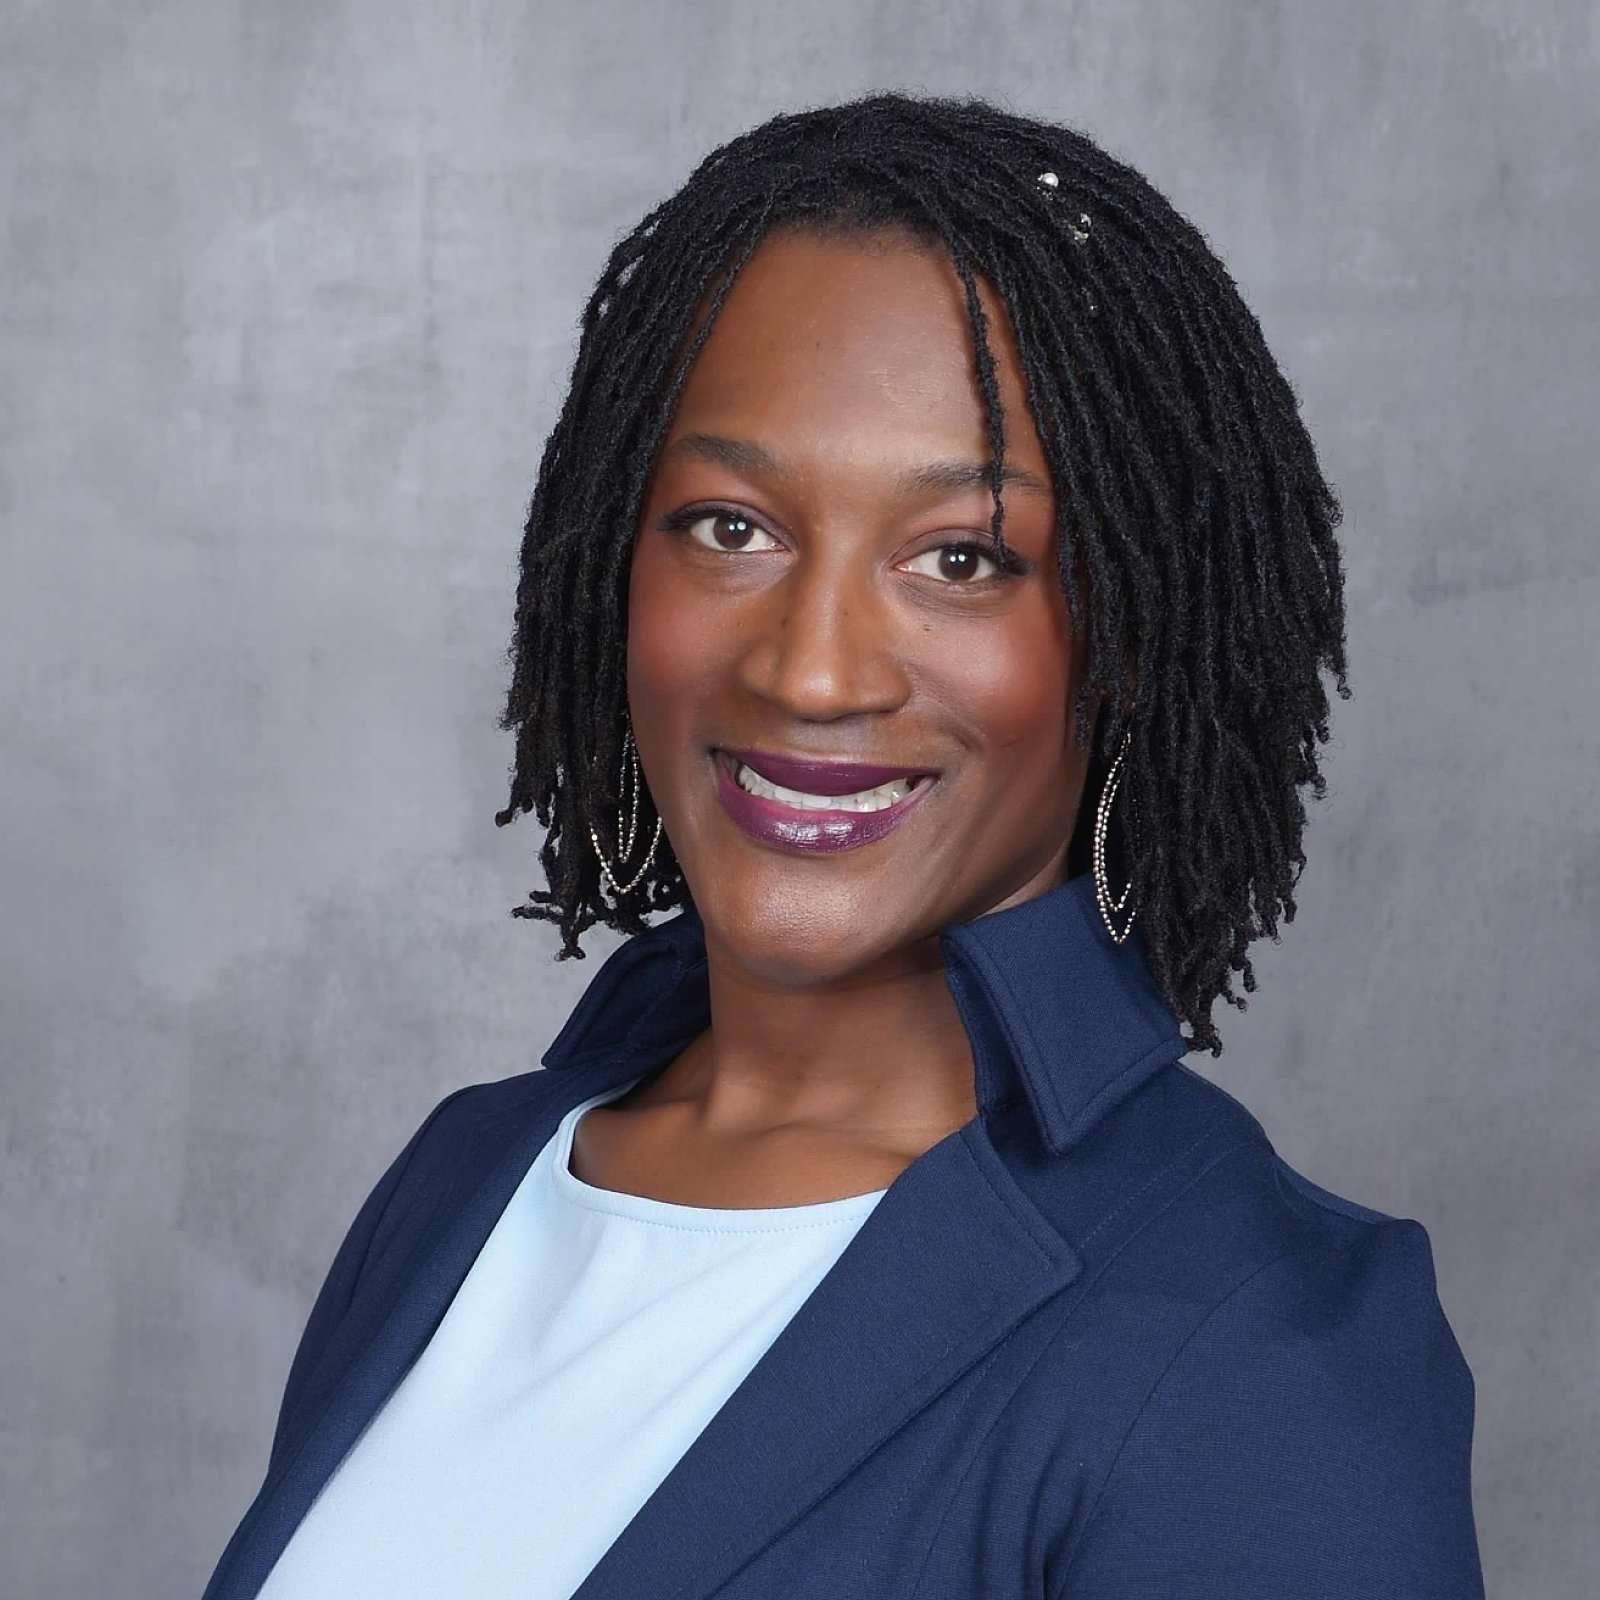 Megan, a Black woman, smiles at the camera, her shoulder length sisterlocks are worn loose around her face. She wears an orange button up shirt underneath a black blazer. 